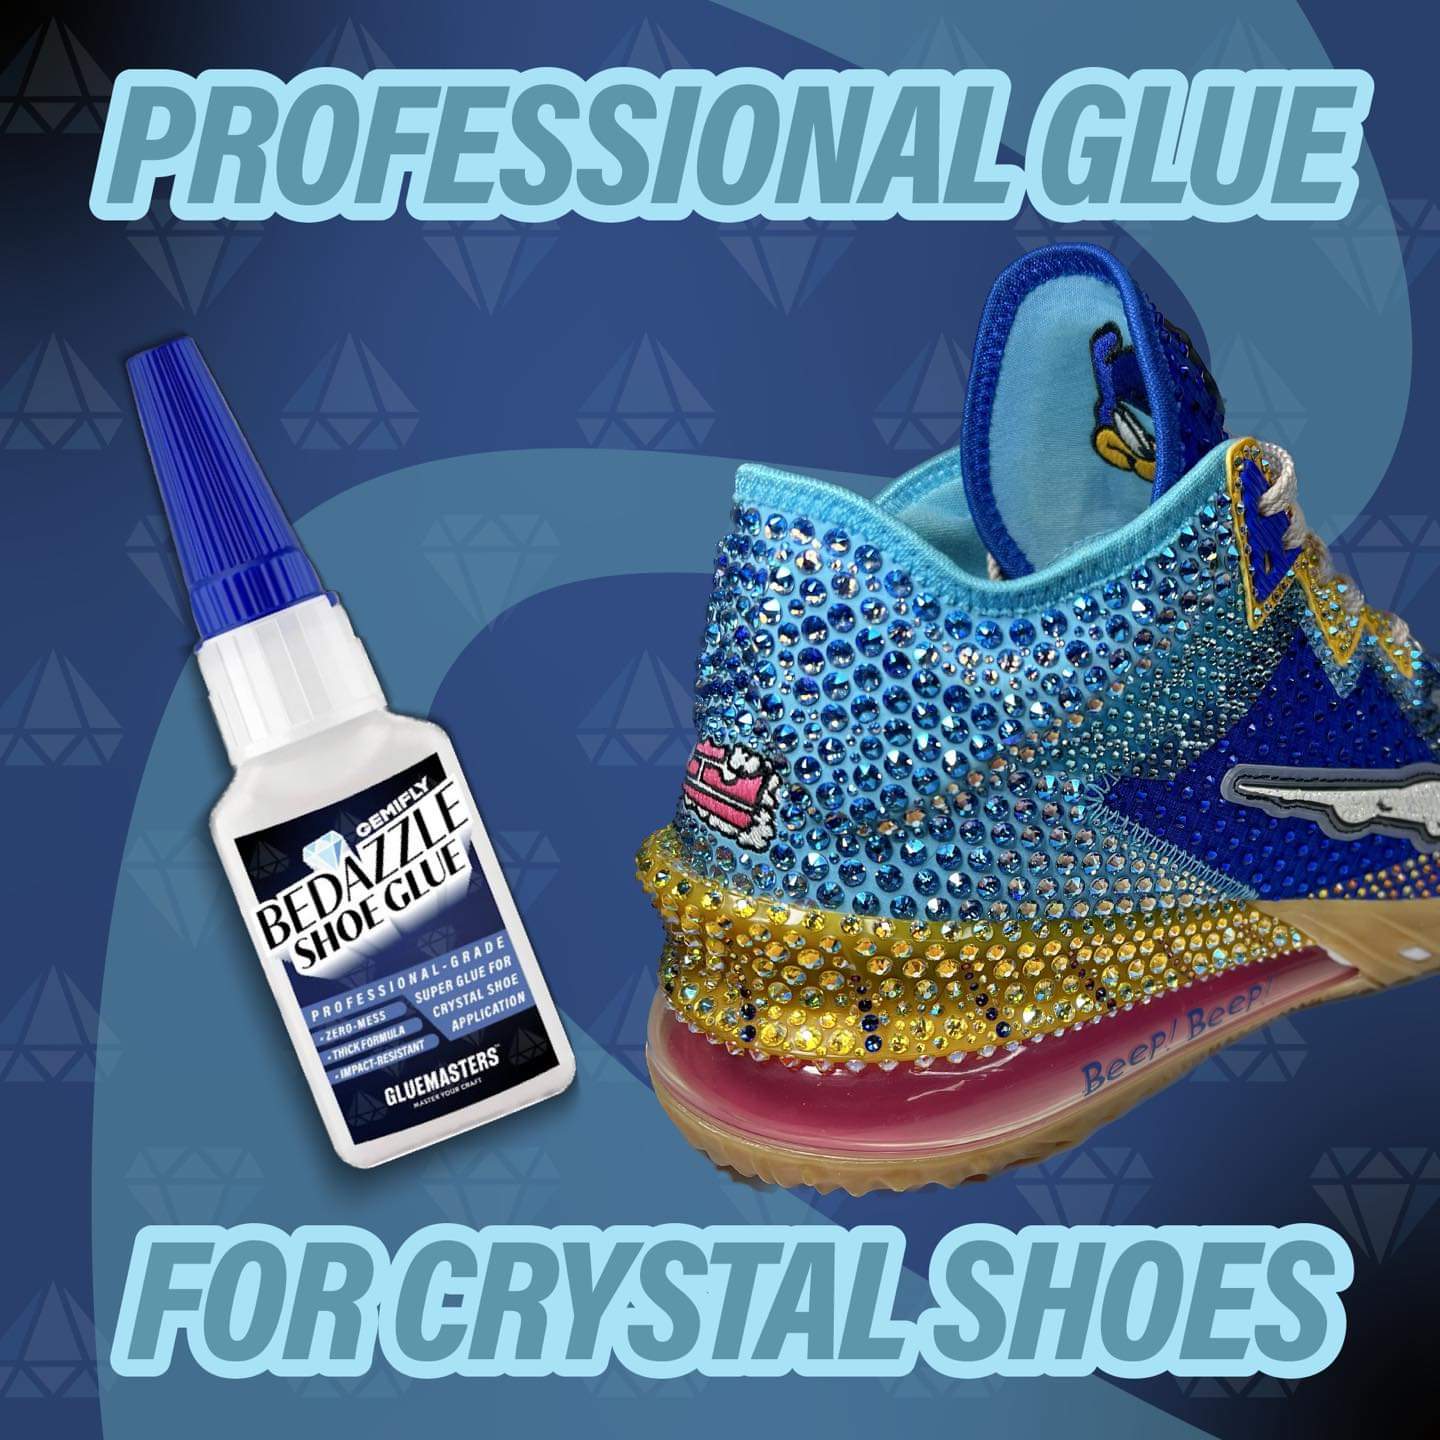 Gemifly Bedazzle Shoe Glue-Adhesives-Bling on the Chaos